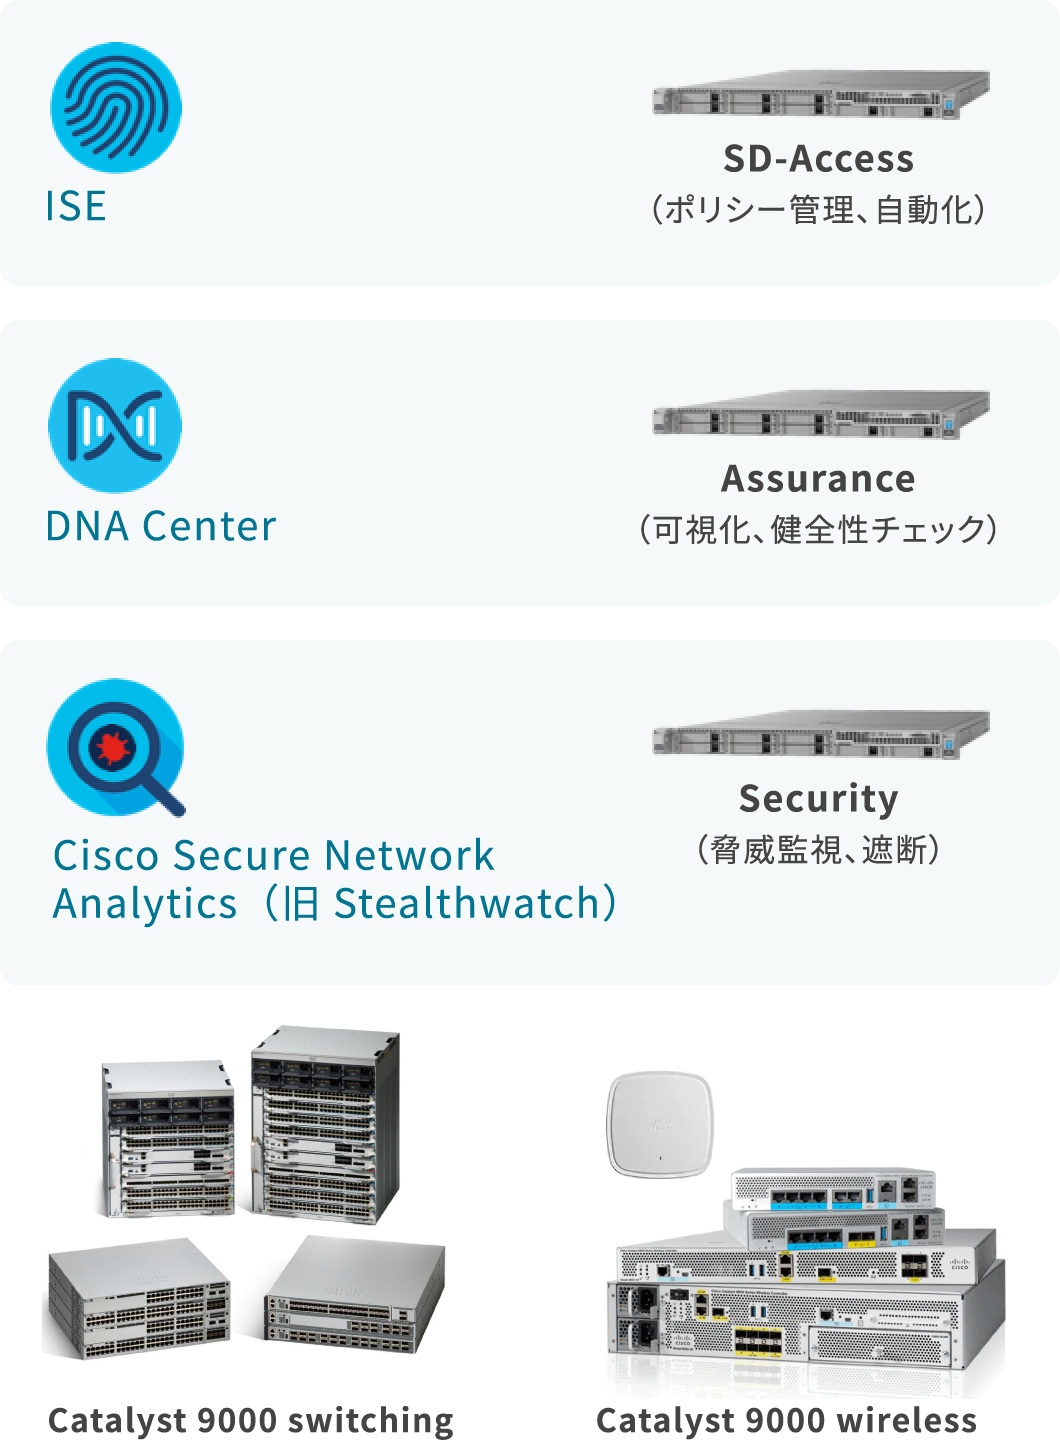 ISE：SD-Access（ポリシー管理、自動化）　DNA center：Assurance（可視化、健全性チェック）、ハードウェア製品　Cisco Secure Network Analytics（旧Stealthwatch）：Security（脅威監視、遮断）　Catalyst 9000 switching Catalyst 9000 wireless